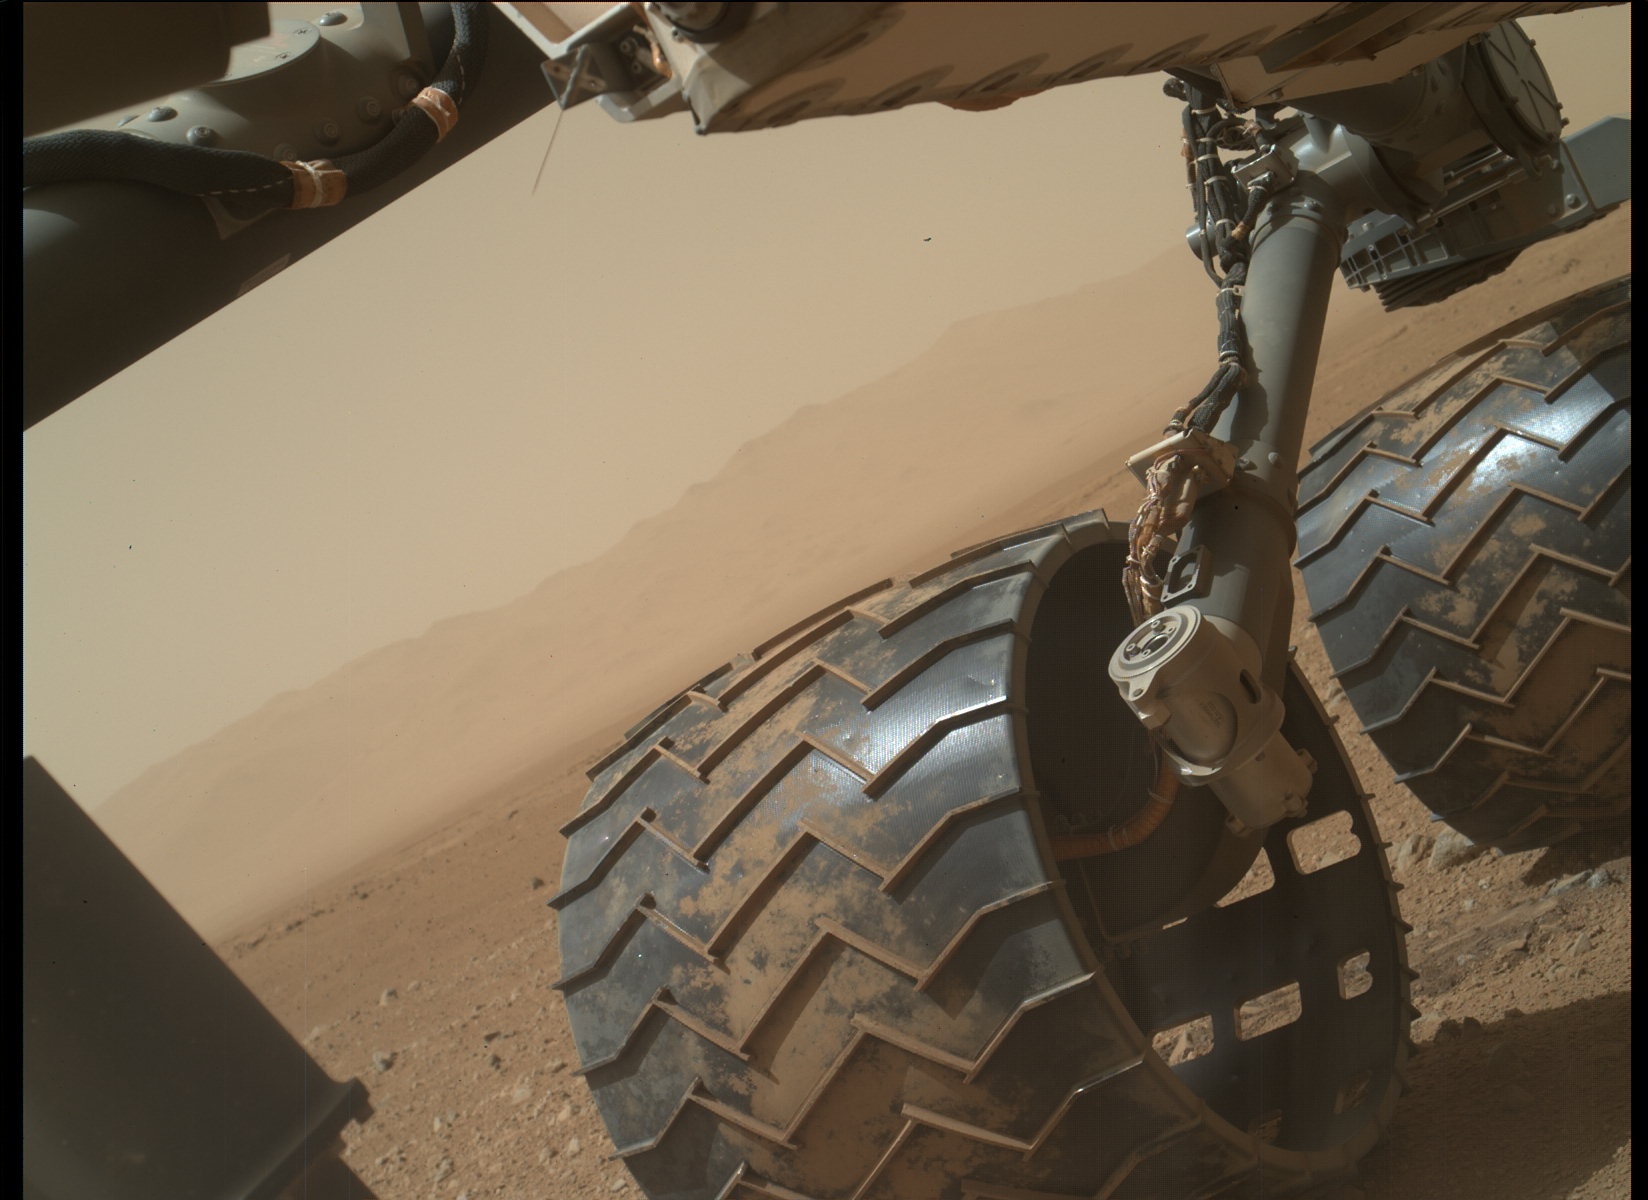 Nasa's Mars rover Curiosity acquired this image using its Mars Hand Lens Imager (MAHLI) on Sol 34